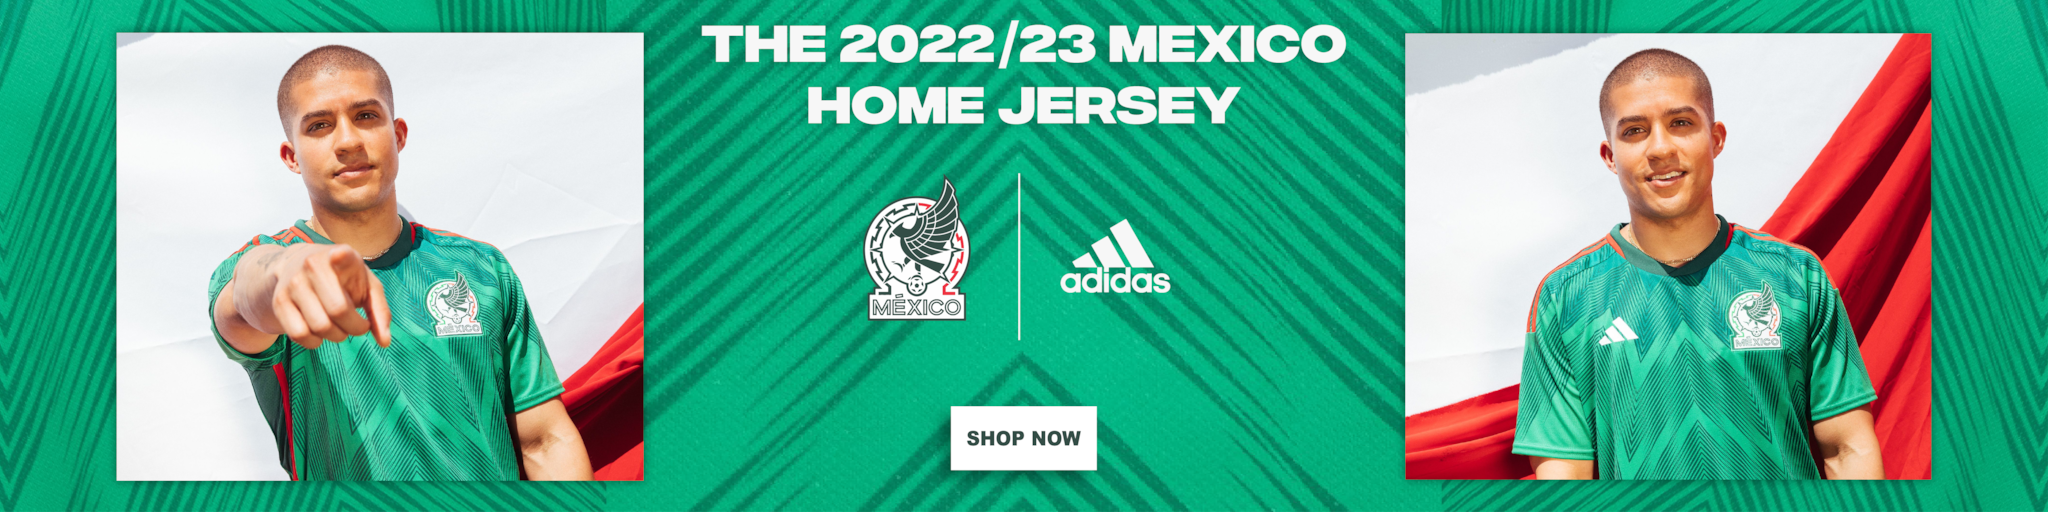 Mexico Home Kit 2022/23 - 2022 World Cup